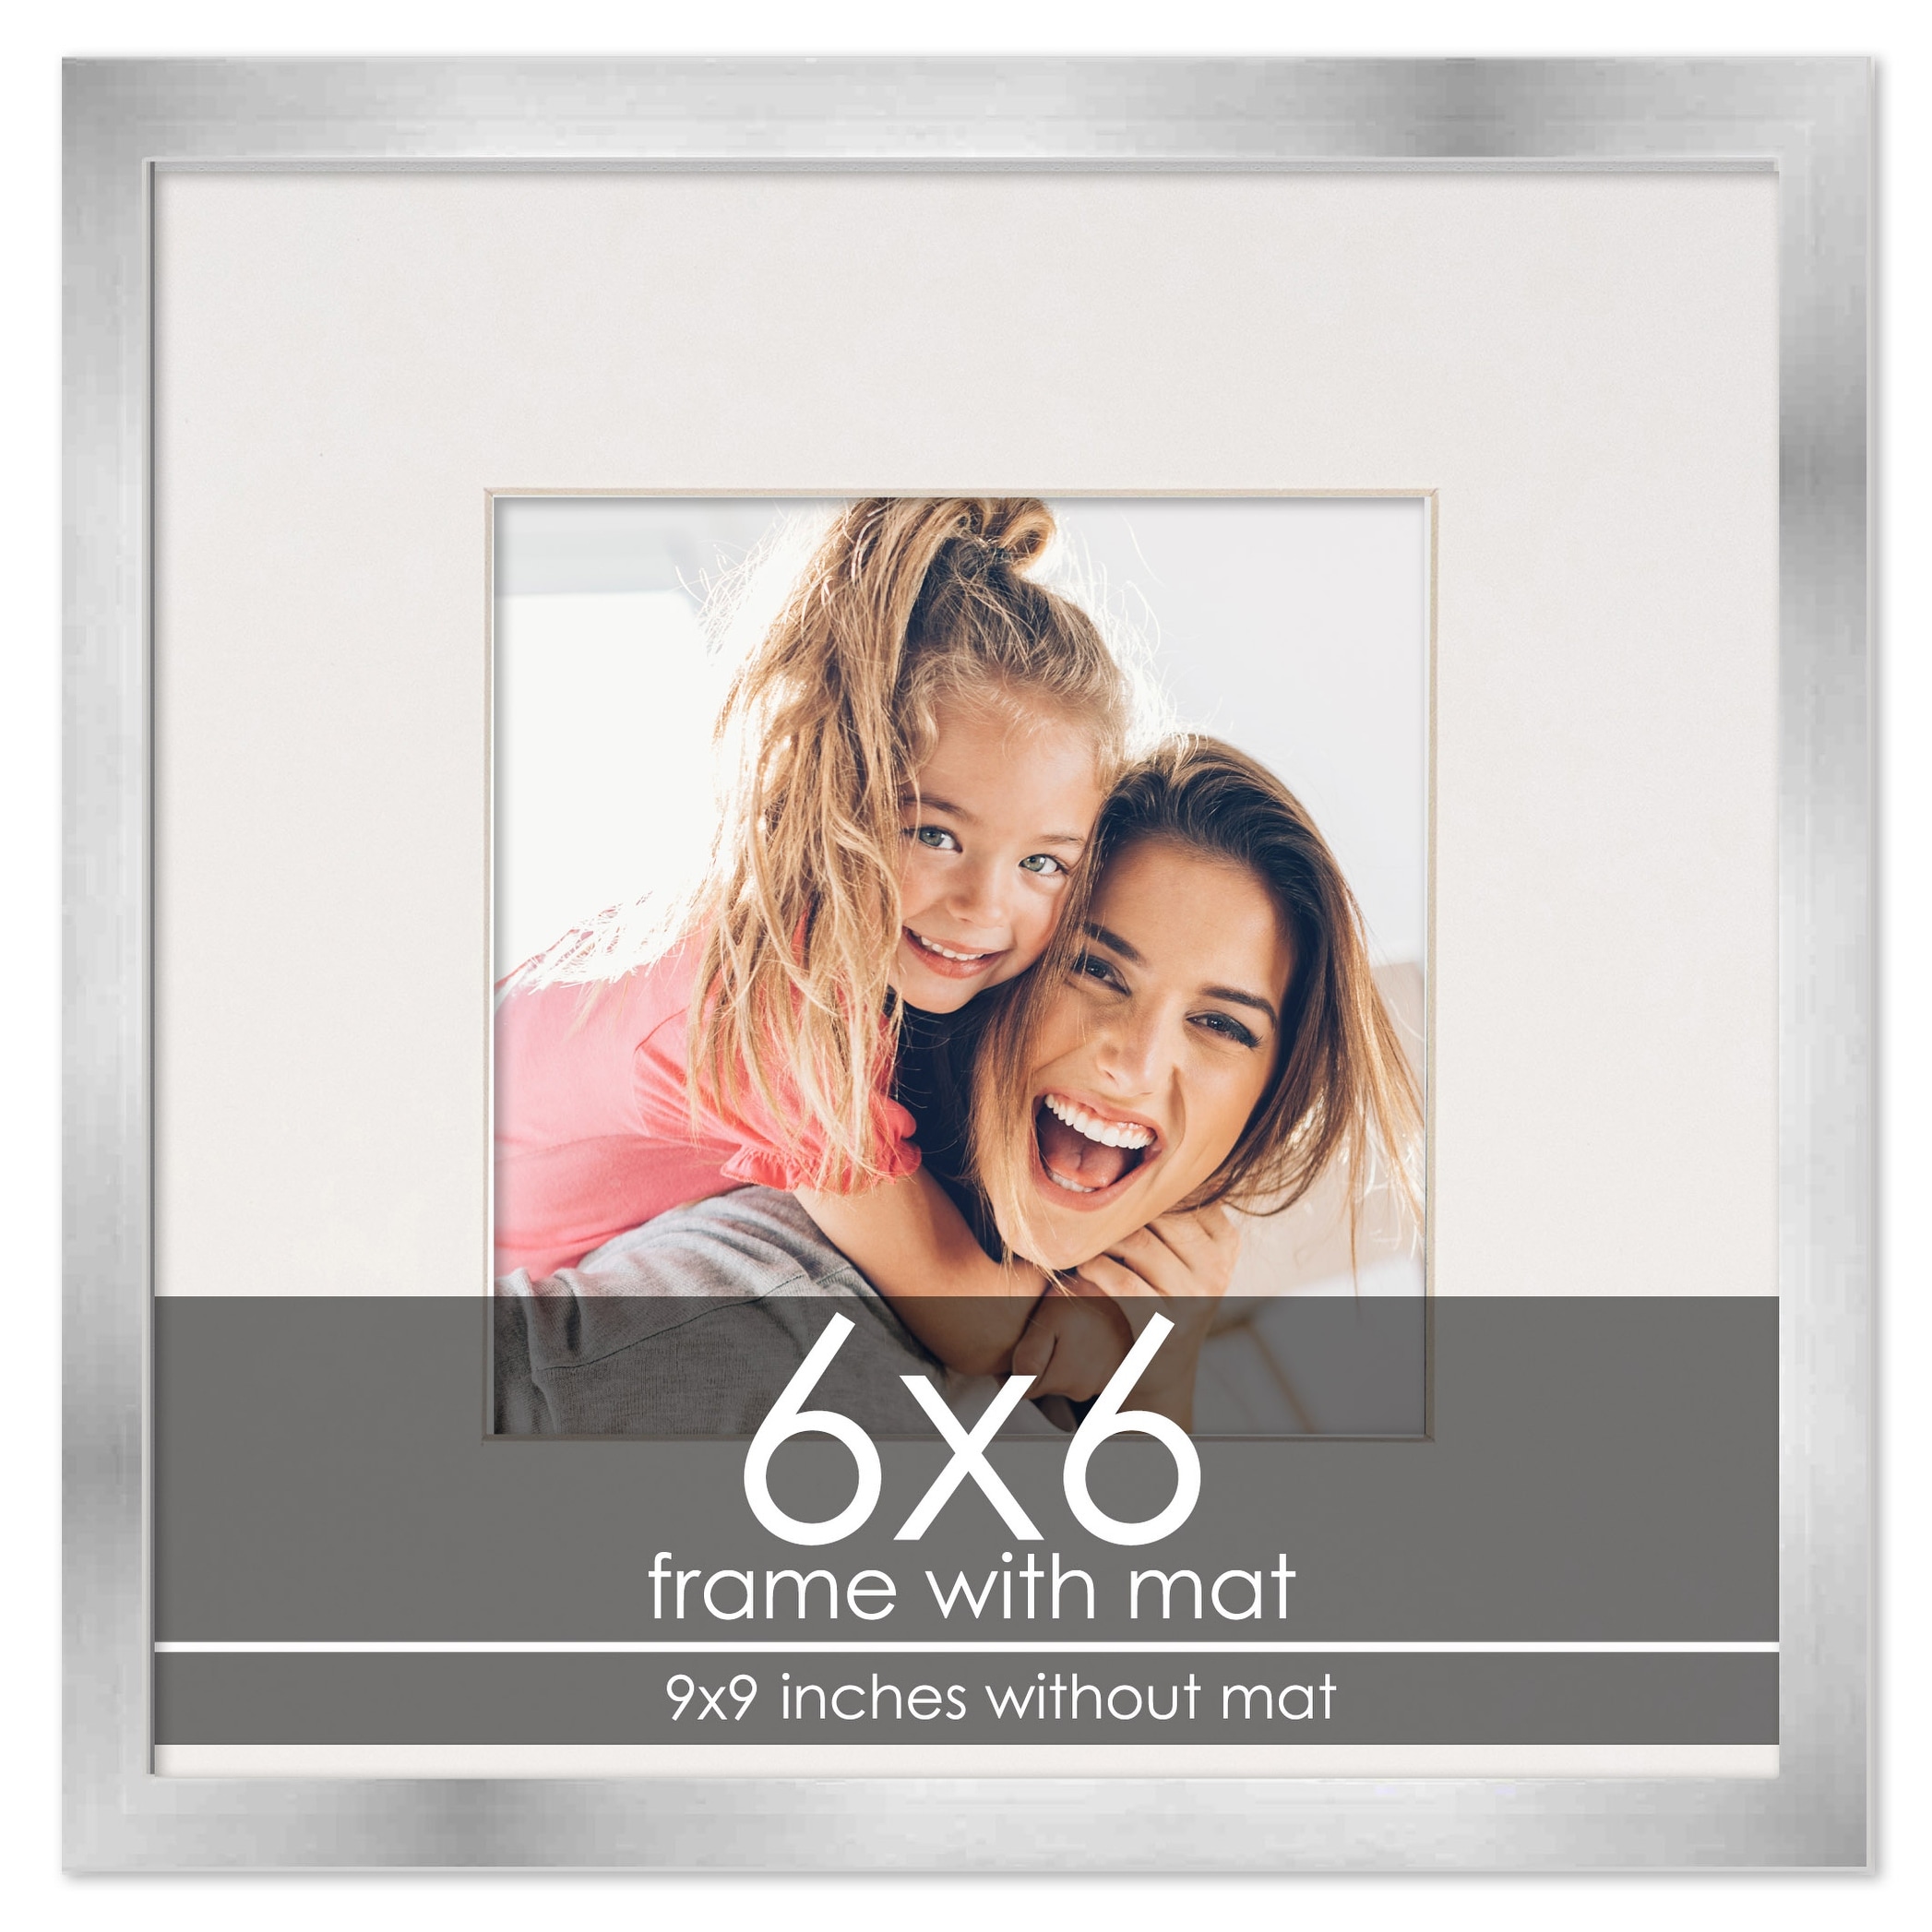 https://ak1.ostkcdn.com/images/products/is/images/direct/fc17ff70433de7f9270d49c28538cb0bdc54f6ec/6x6-Frame-with-Mat---Silver-9x9-Frame-Wood-Made-to-Display-Print-or-Poster-Measuring-6-x-6-Inches-with-White-Photo-Mat.jpg